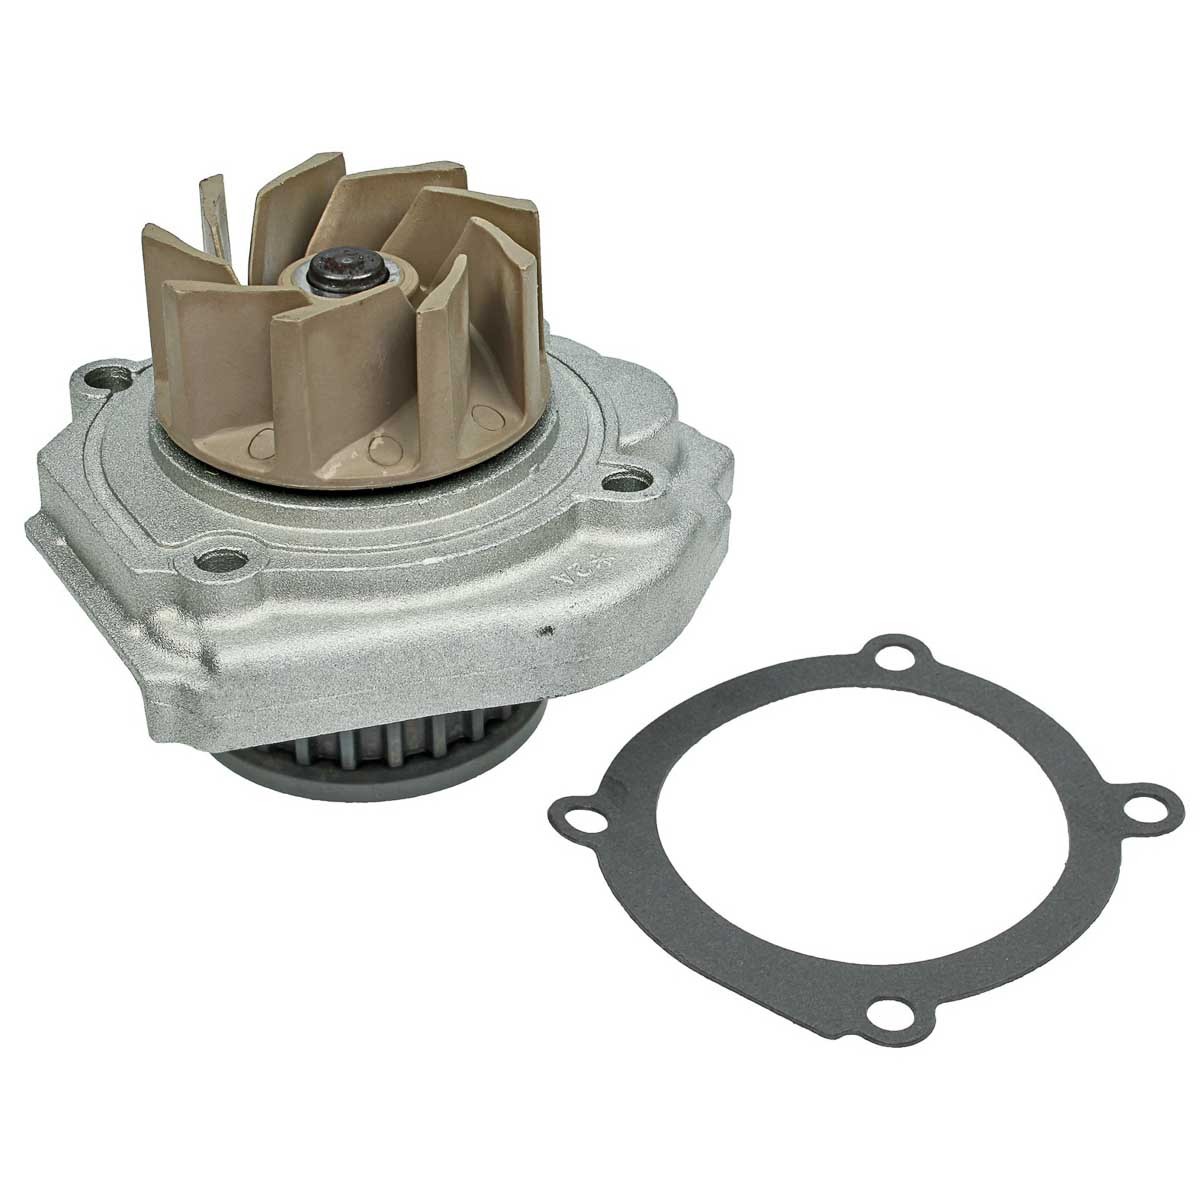 213 220 0022 MEYLE Water pumps ALFA ROMEO Number of Teeth: 23, with seal, ORIGINAL Quality, for toothed belt drive